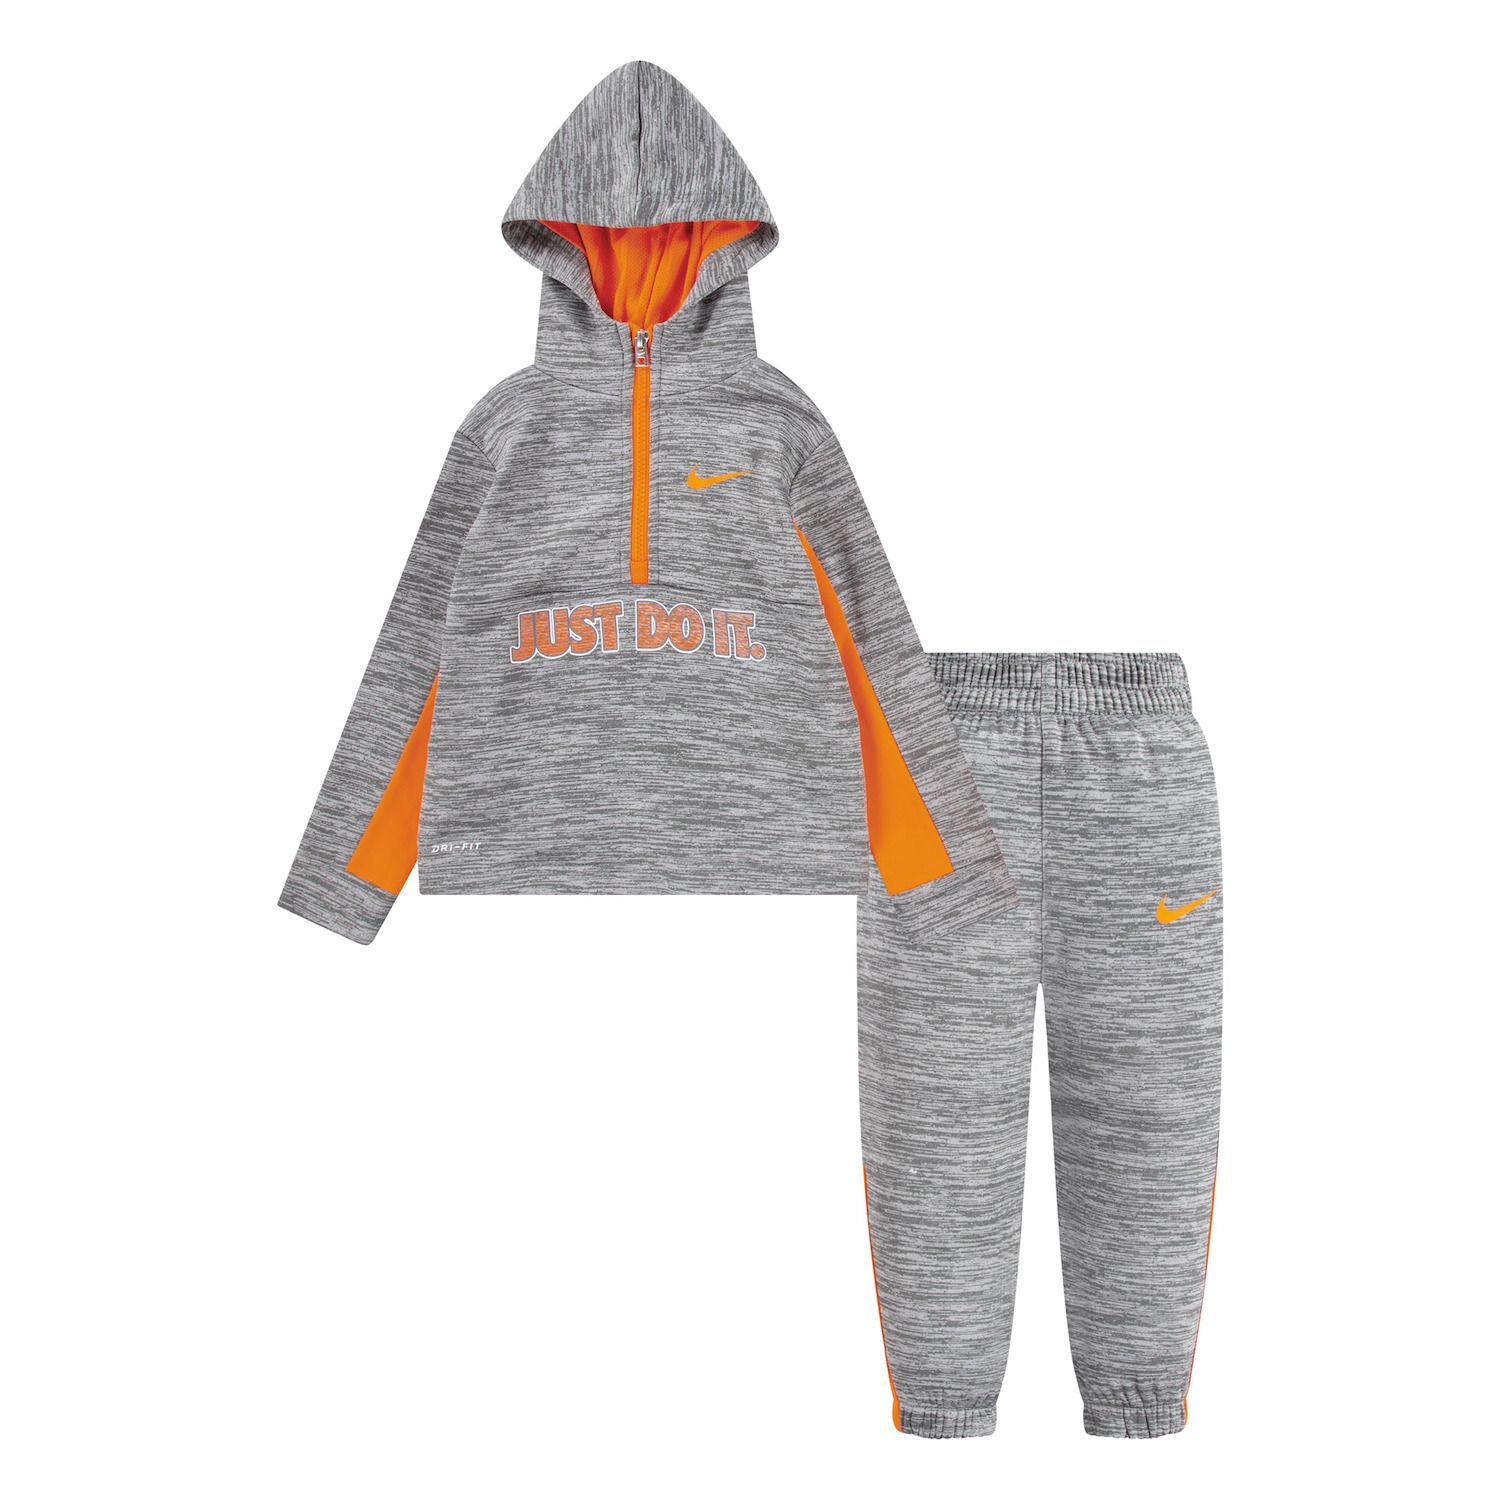 women's nike hoodie and jogger set